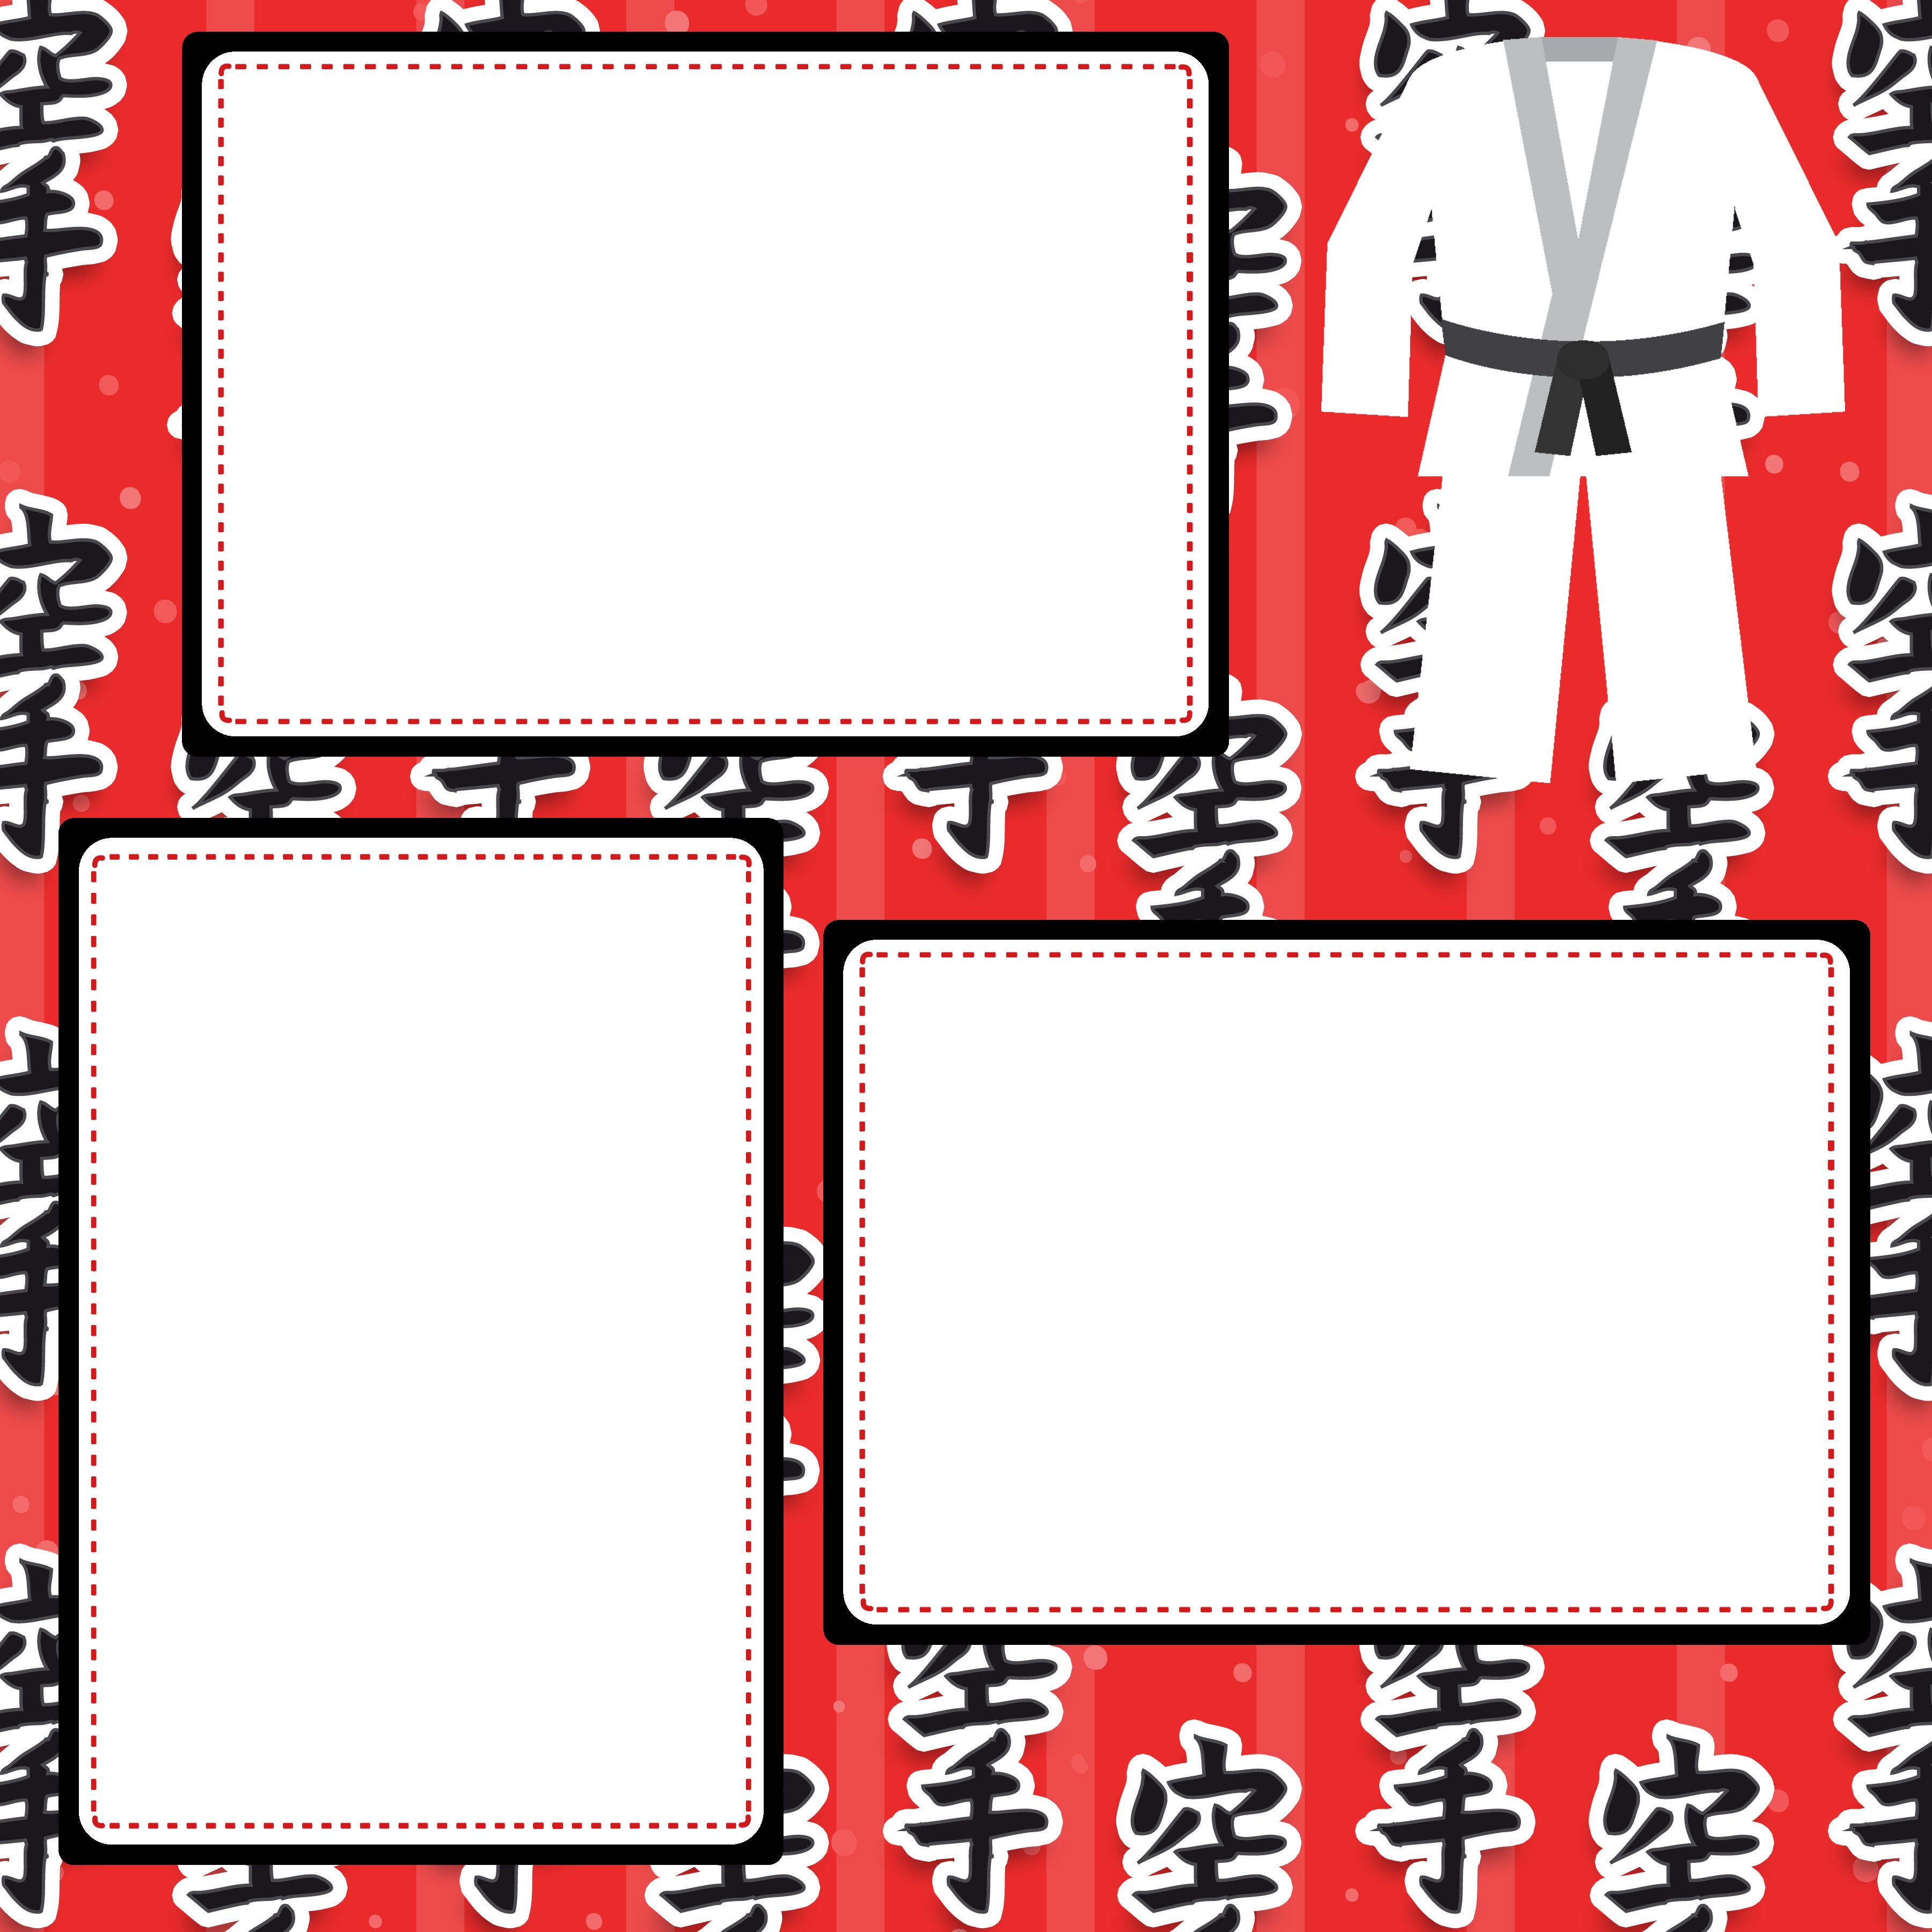 Karate (2) - 12 x 12 Premade, Printed Scrapbook Pages by SSC Designs